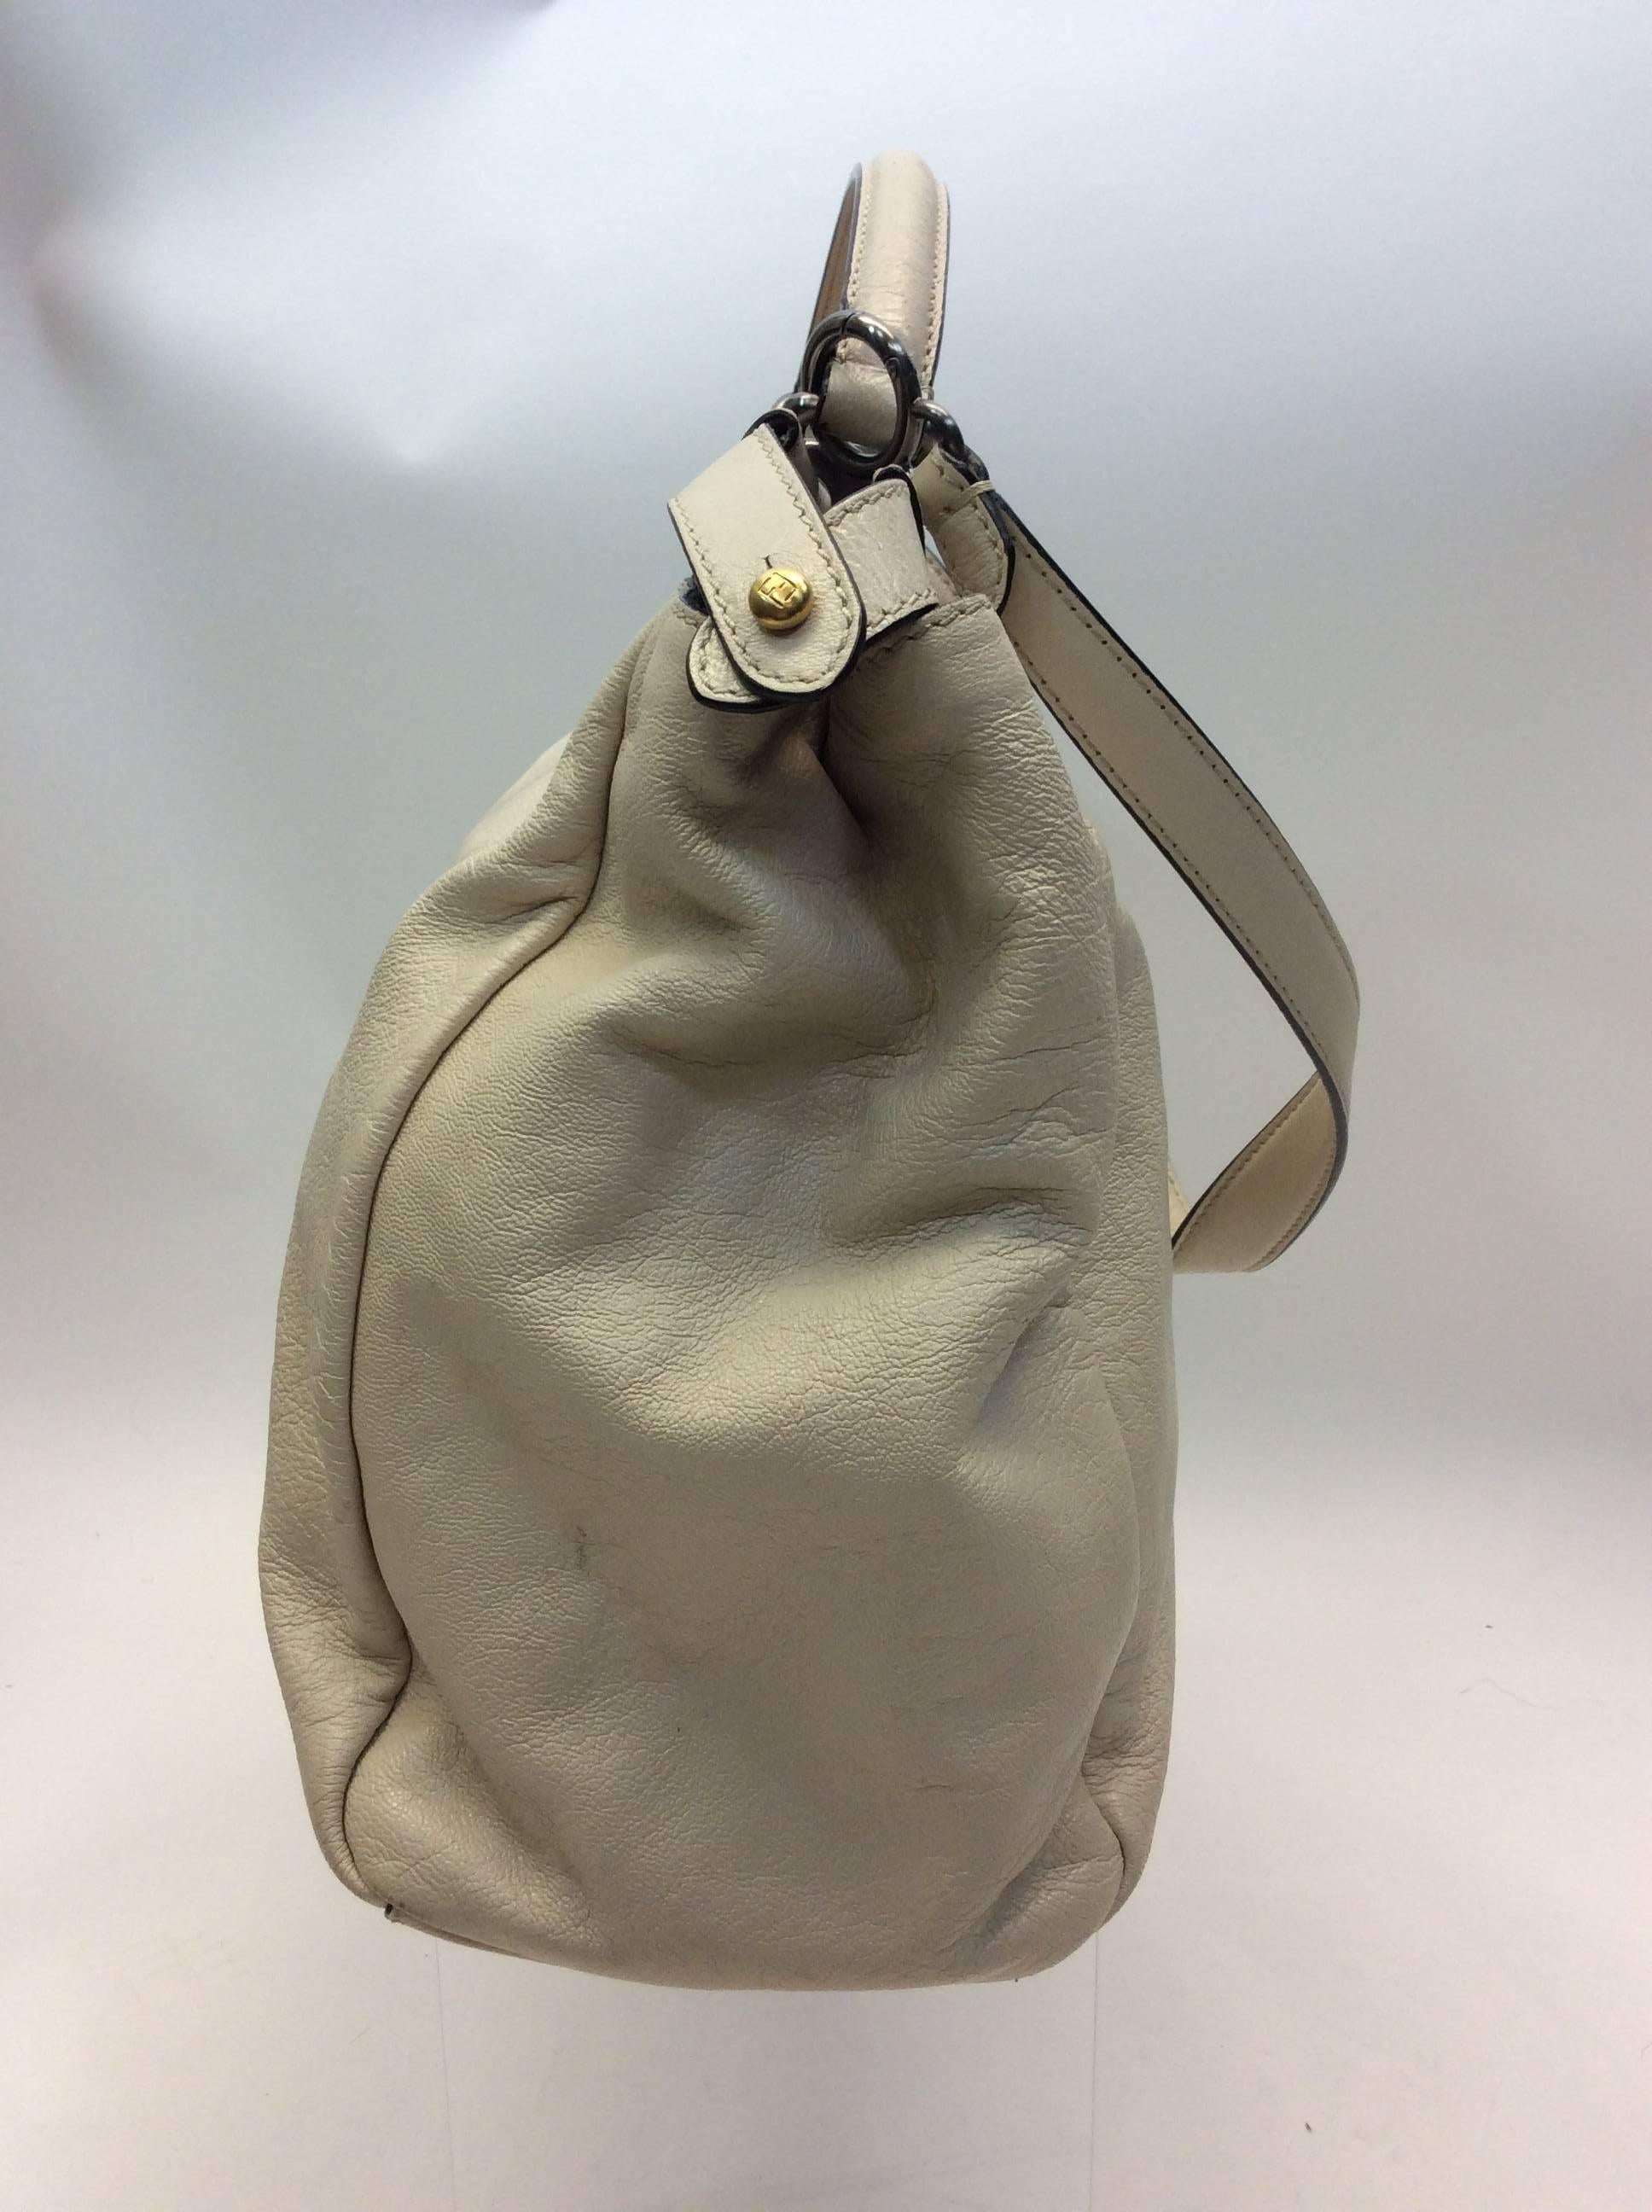 Fendi White Ombre Peek-A-Boo Purse
$1100
Leather
Made in Italy
16